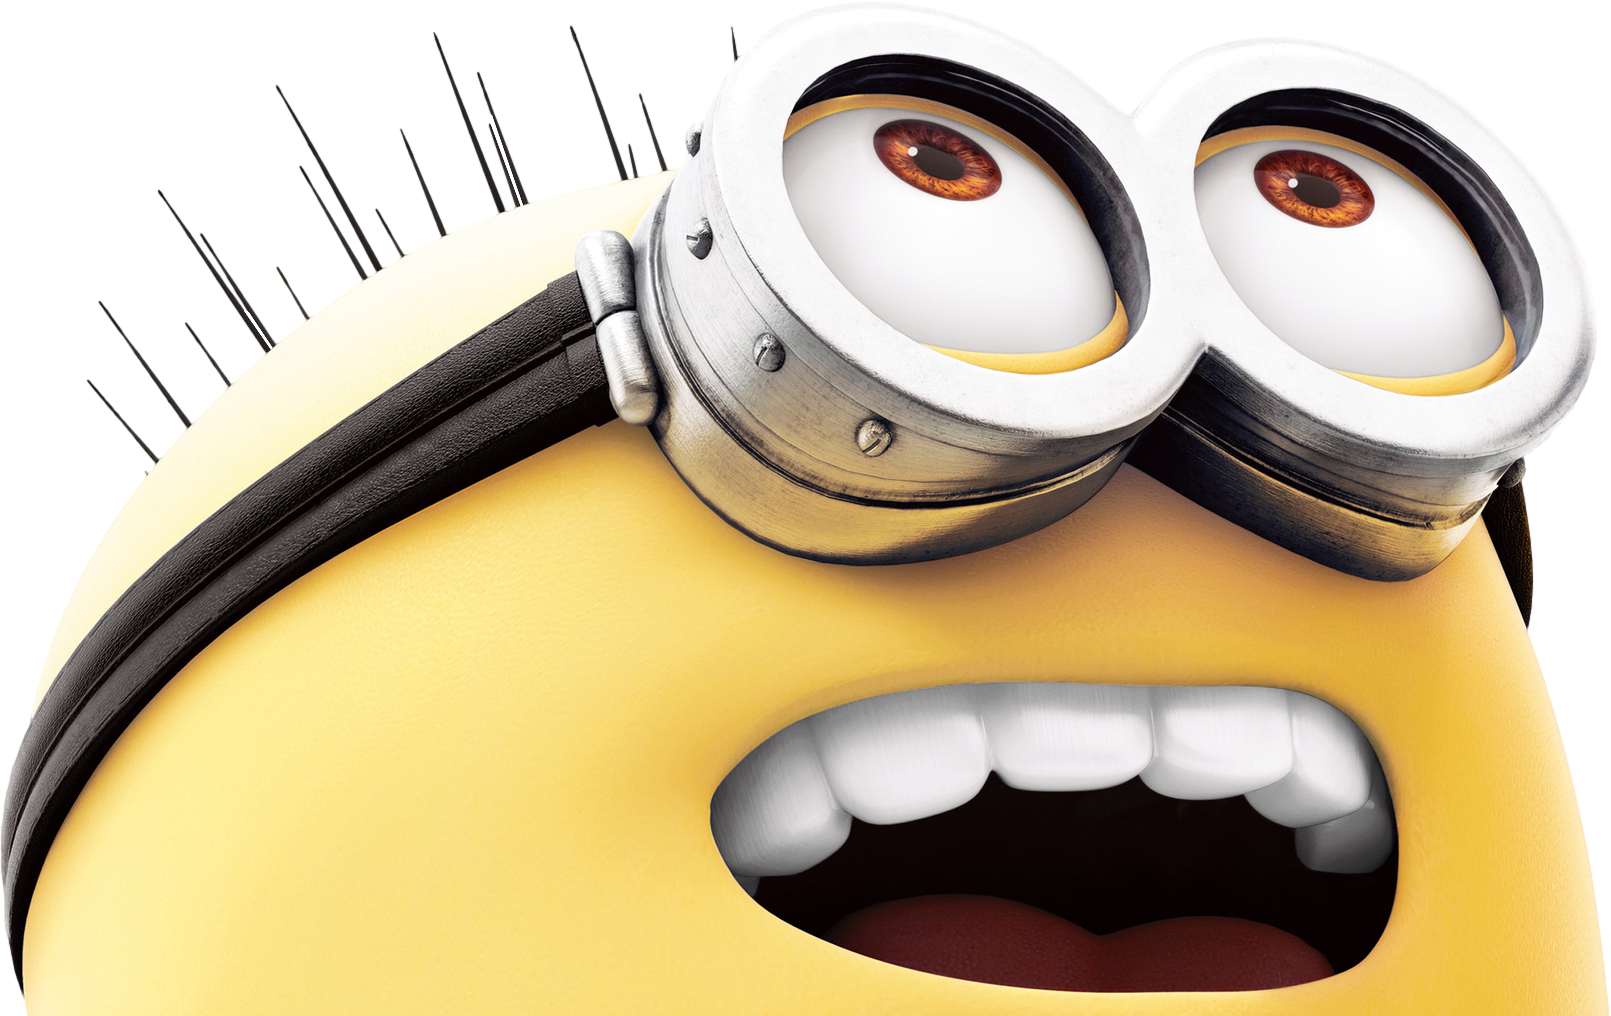 Minions PNG images 